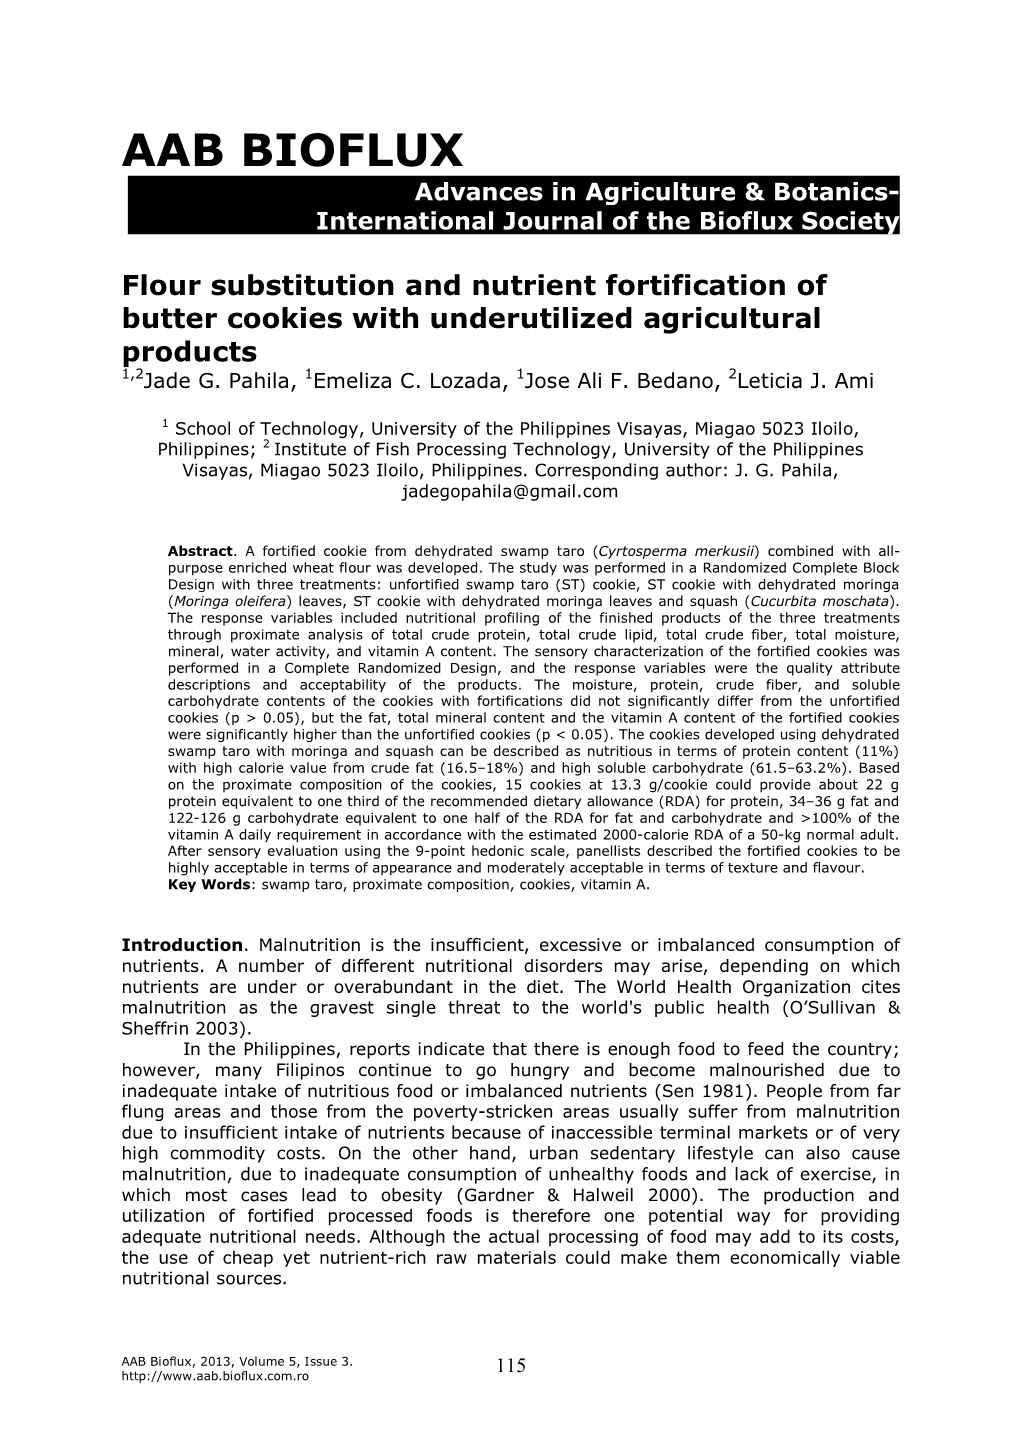 Flour Substitution and Nutrient Fortification of Butter Cookies with Underutilized Agricultural Products 1,2Jade G